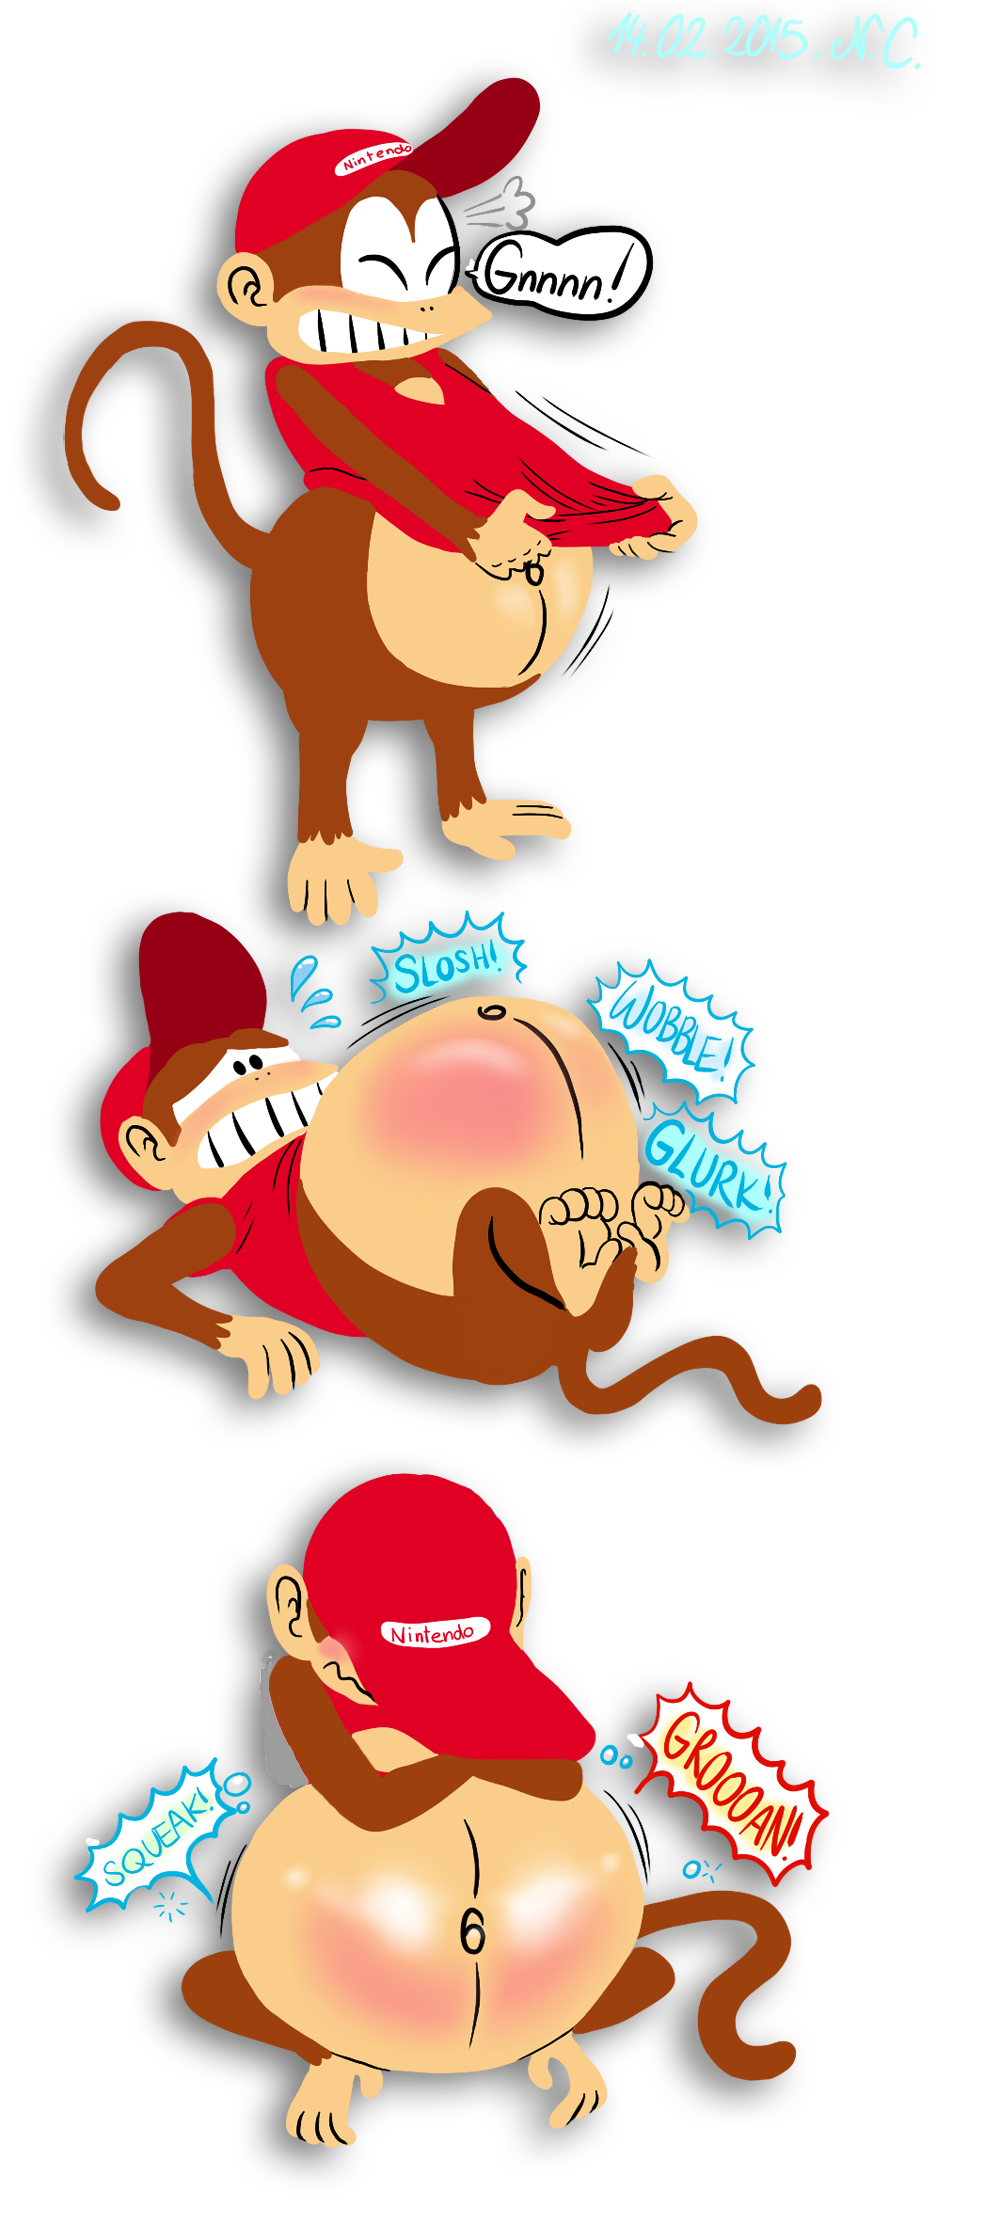 Big bellied Diddy Kong